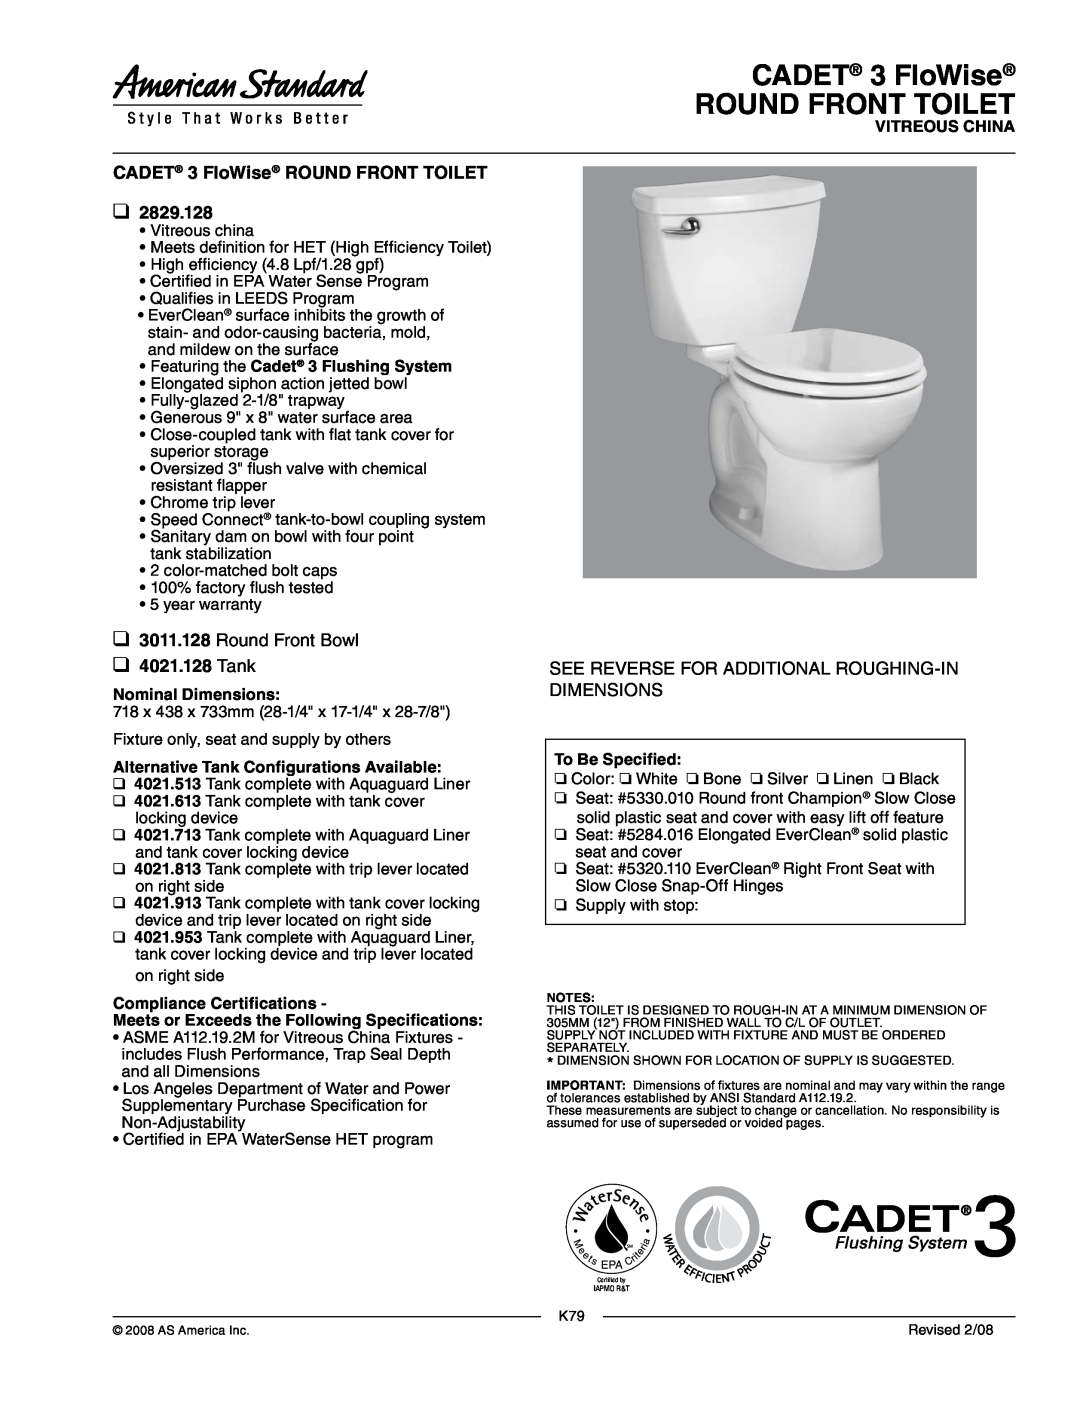 American Standard 2829.128 dimensions CADET 3 FloWise ROUND FRONT TOILET, Vitreous China, Nominal Dimensions, Tank 